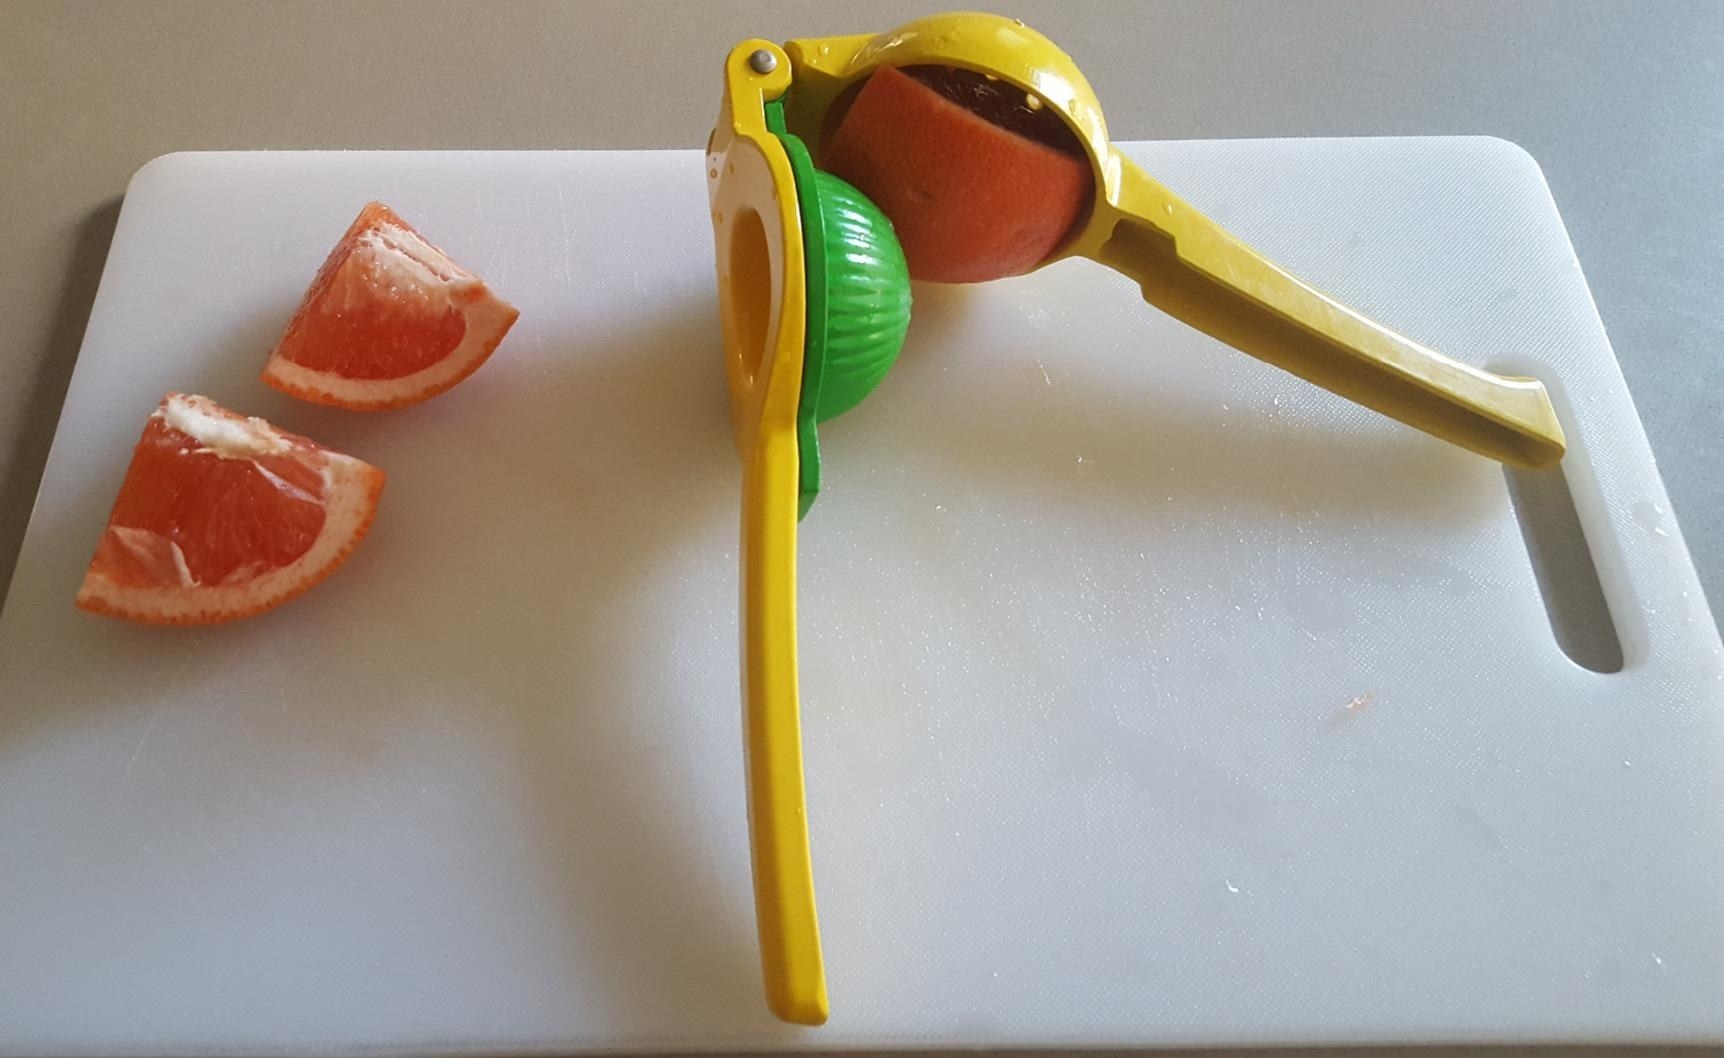 A yellow and green citrus juicer with a slice of orange inside, placed next to two slices of orange on a cutting board